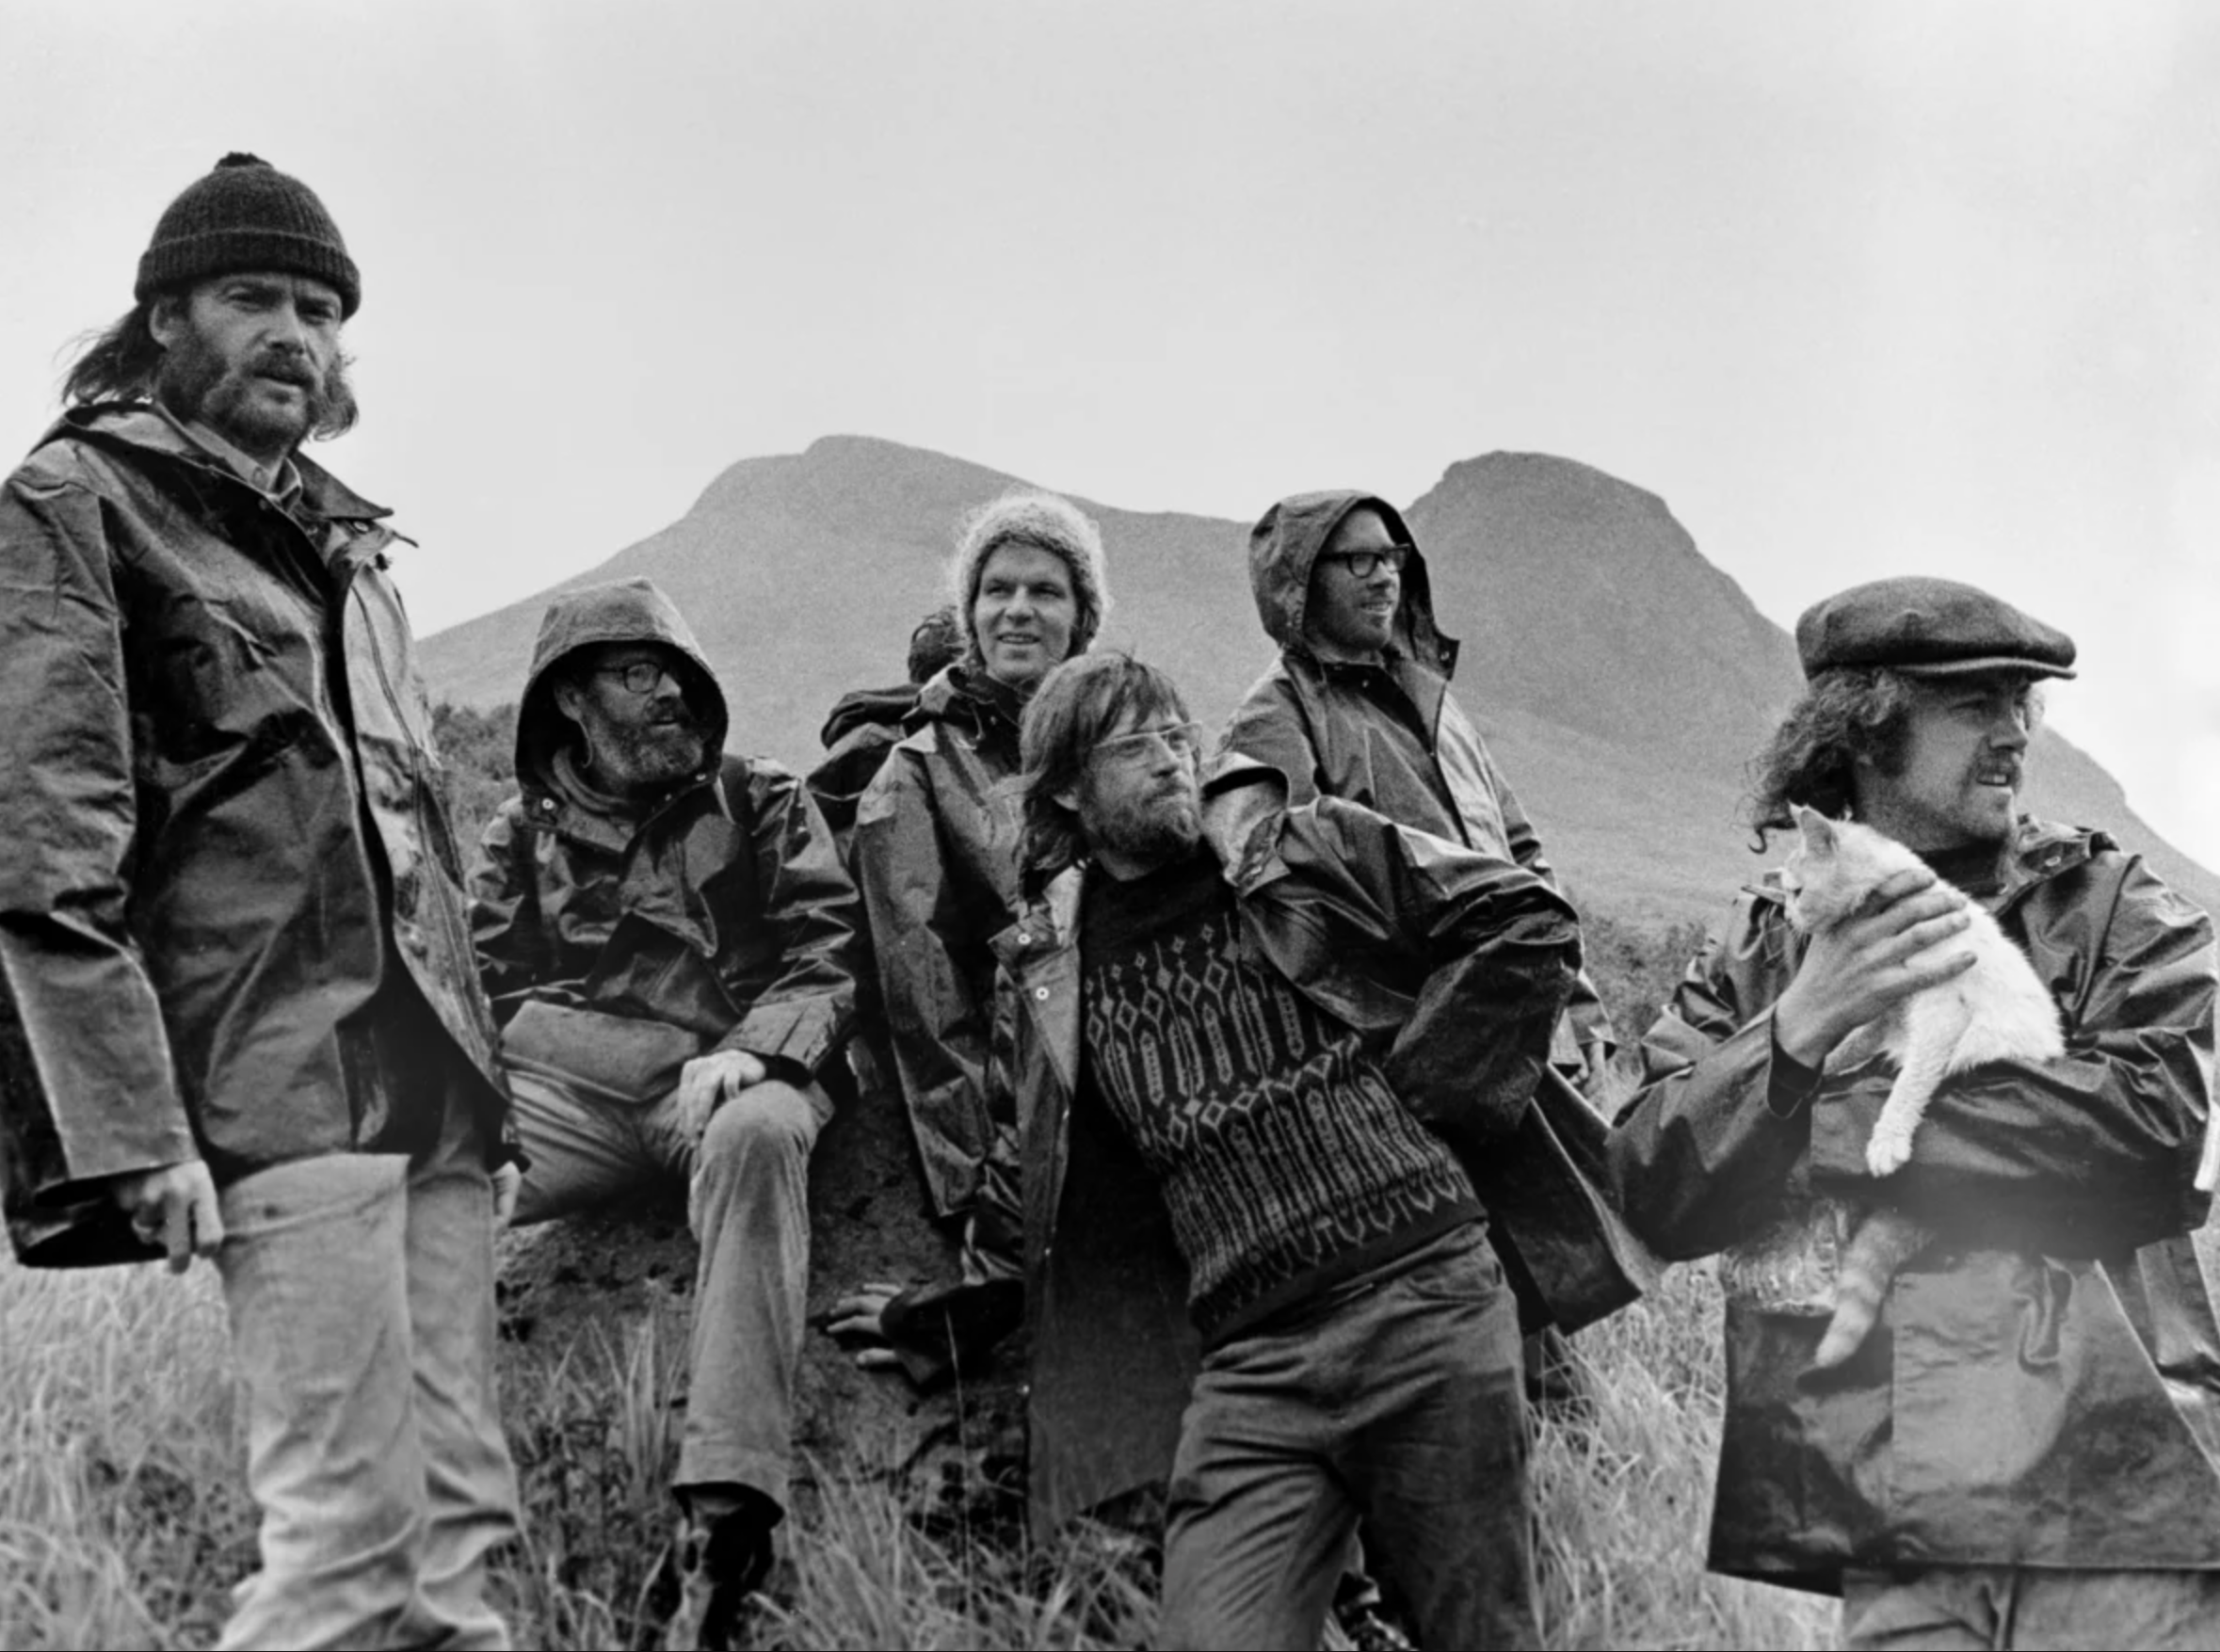 Robert Hunter and other members of the group who took part of the first Greenpeace voyage, which departed Vancouver on the 15th September 1971 to halt nuclear tests in Amchitka.